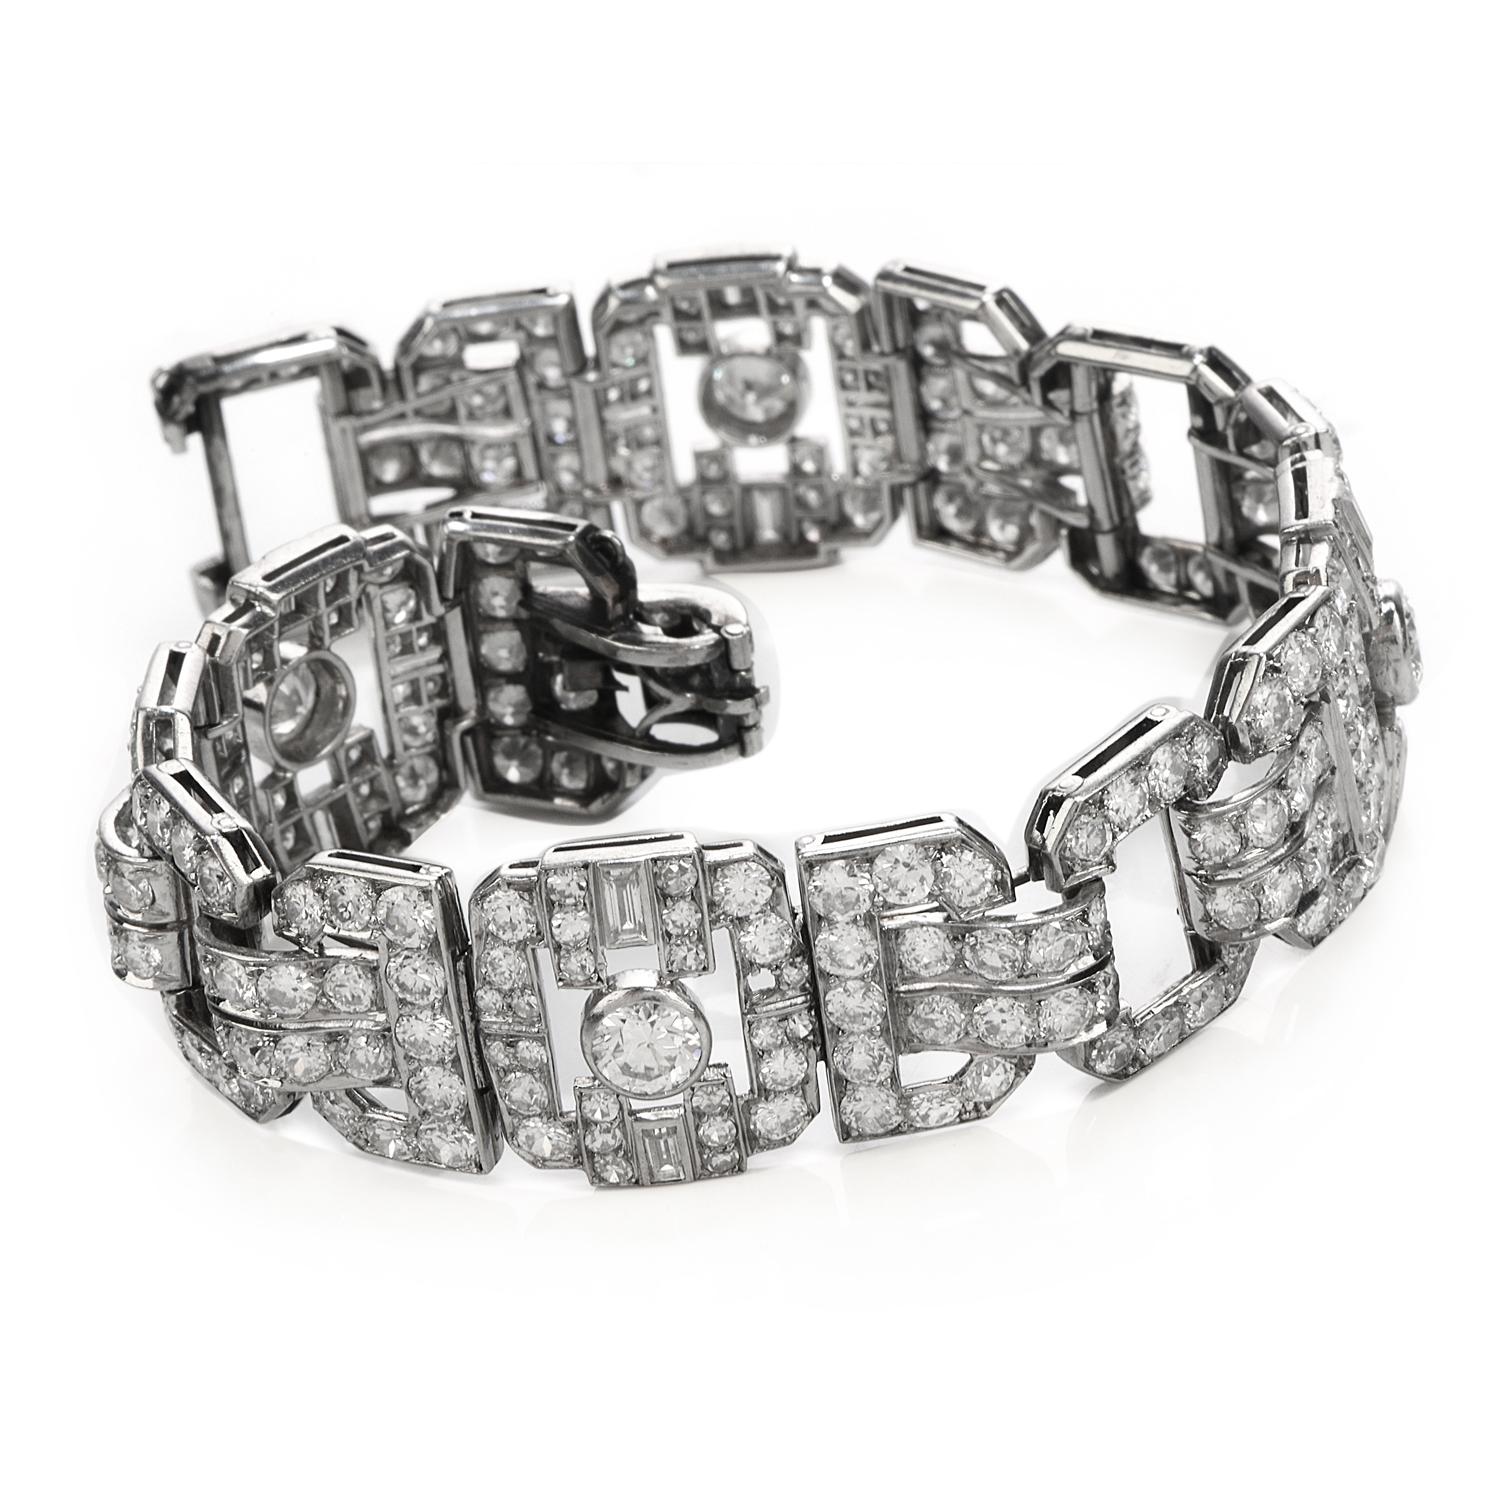 This stunning Antique 1930s Bracelet was inspired by the Art Deco era and is crafted in Luxurious Platinum.

Along the center, 4 larger European cut Diamonds are prominently featured, weighing approx. 1.80 carats and are of G-H color, with very nice